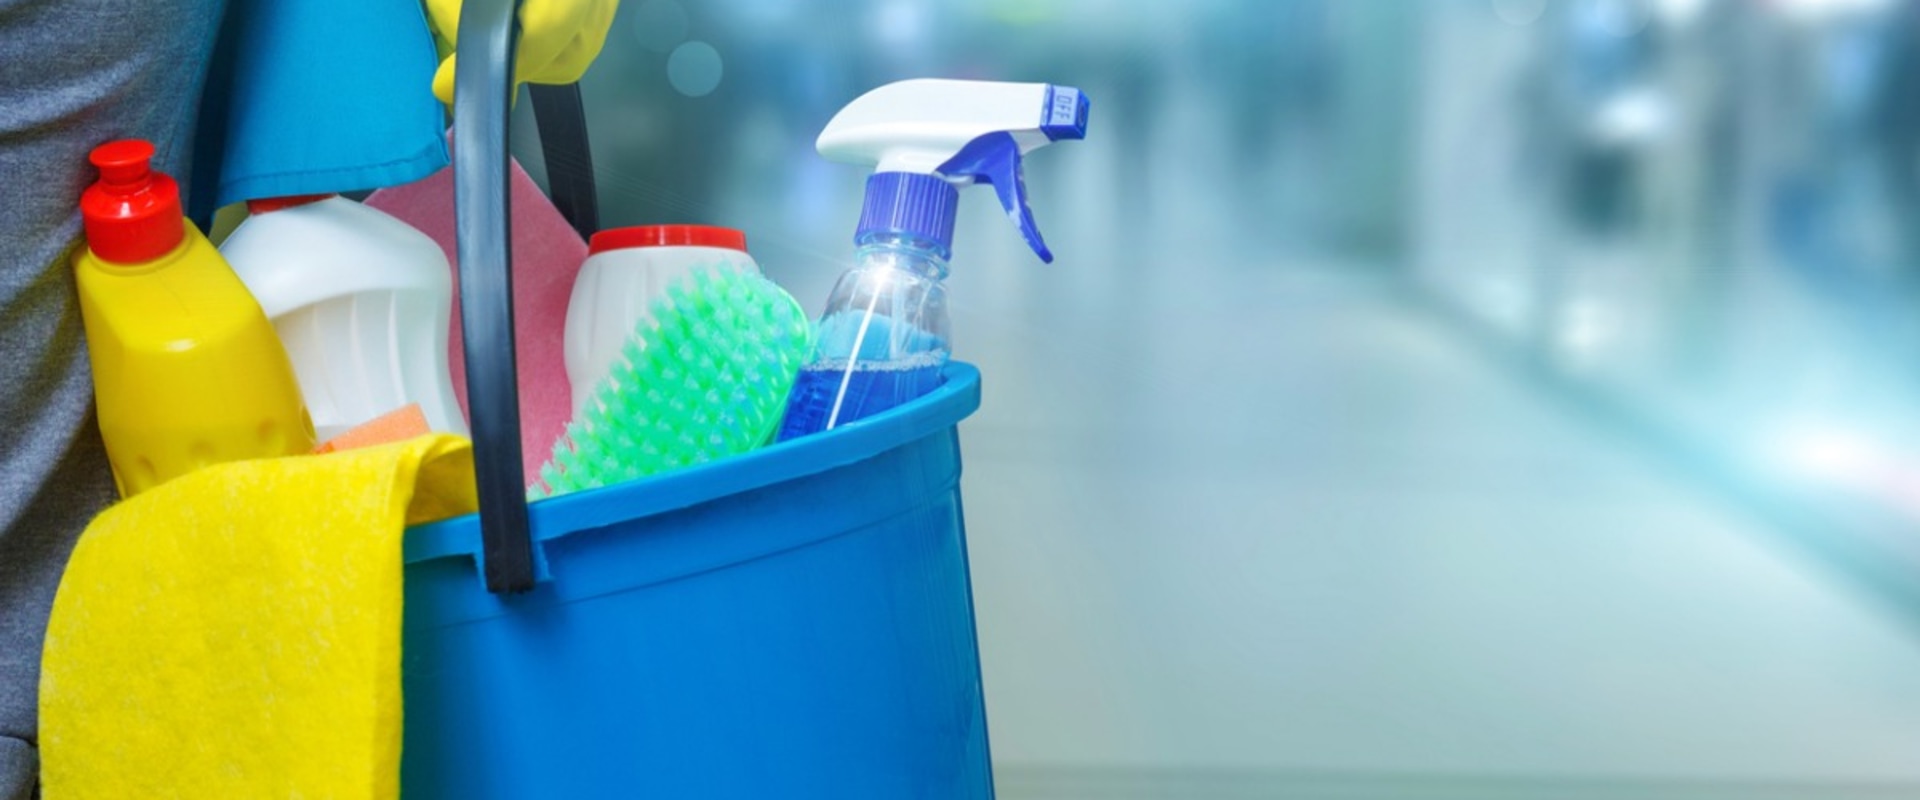 Is commercial cleaning an essential business?